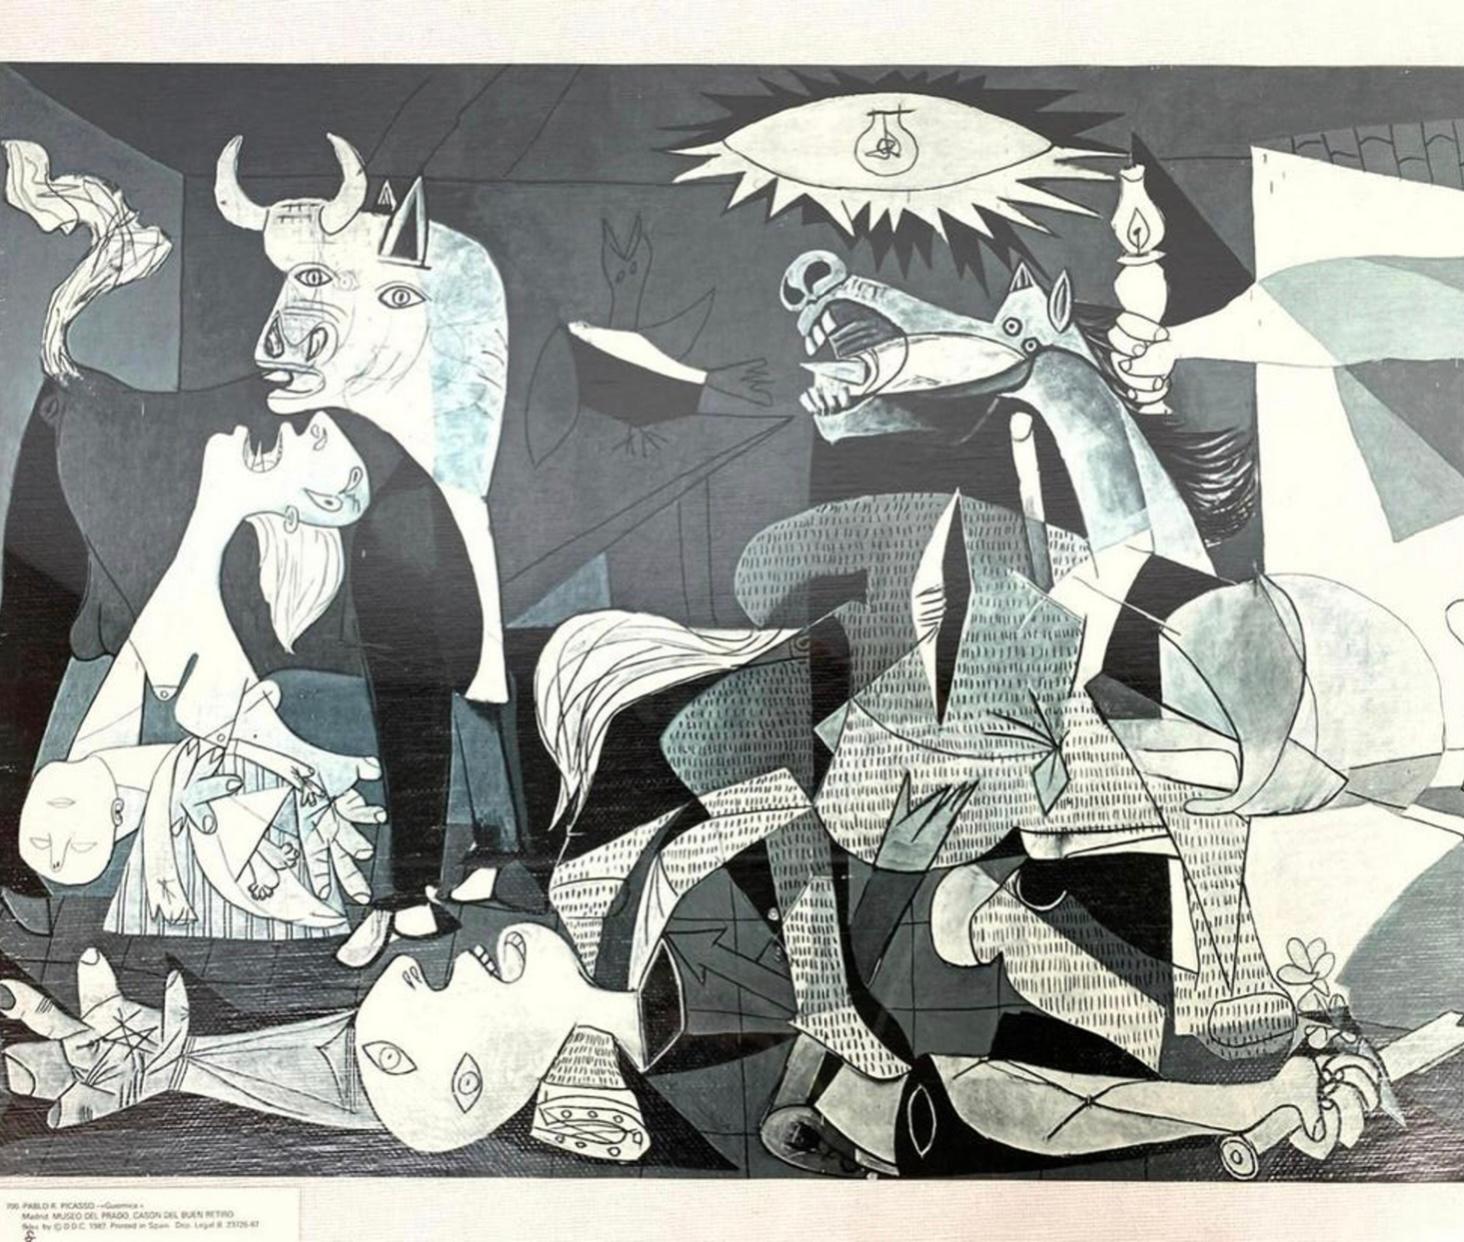 Framed Pablo Picasso print of “Guernica” in great shape. Printed in 1987. Ready to hang. Original black frame presents well. Measures: 17.5” tall and 33” wide and 1” deep. The dimensions of the printed area in its current presentation are 26.5” wide